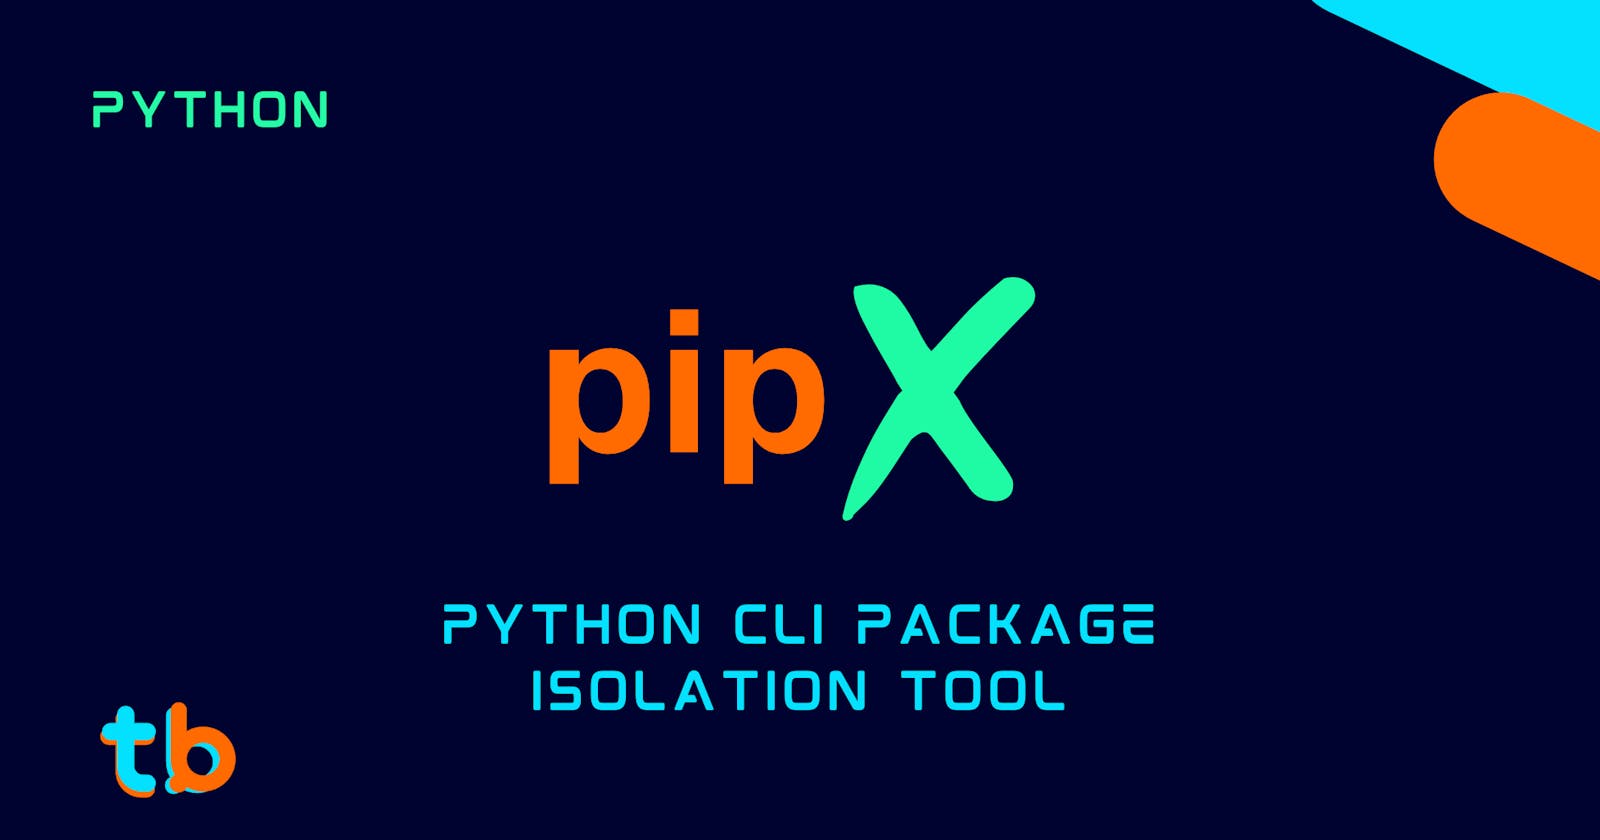 Pipx: A python package consumption tool for CLI packages